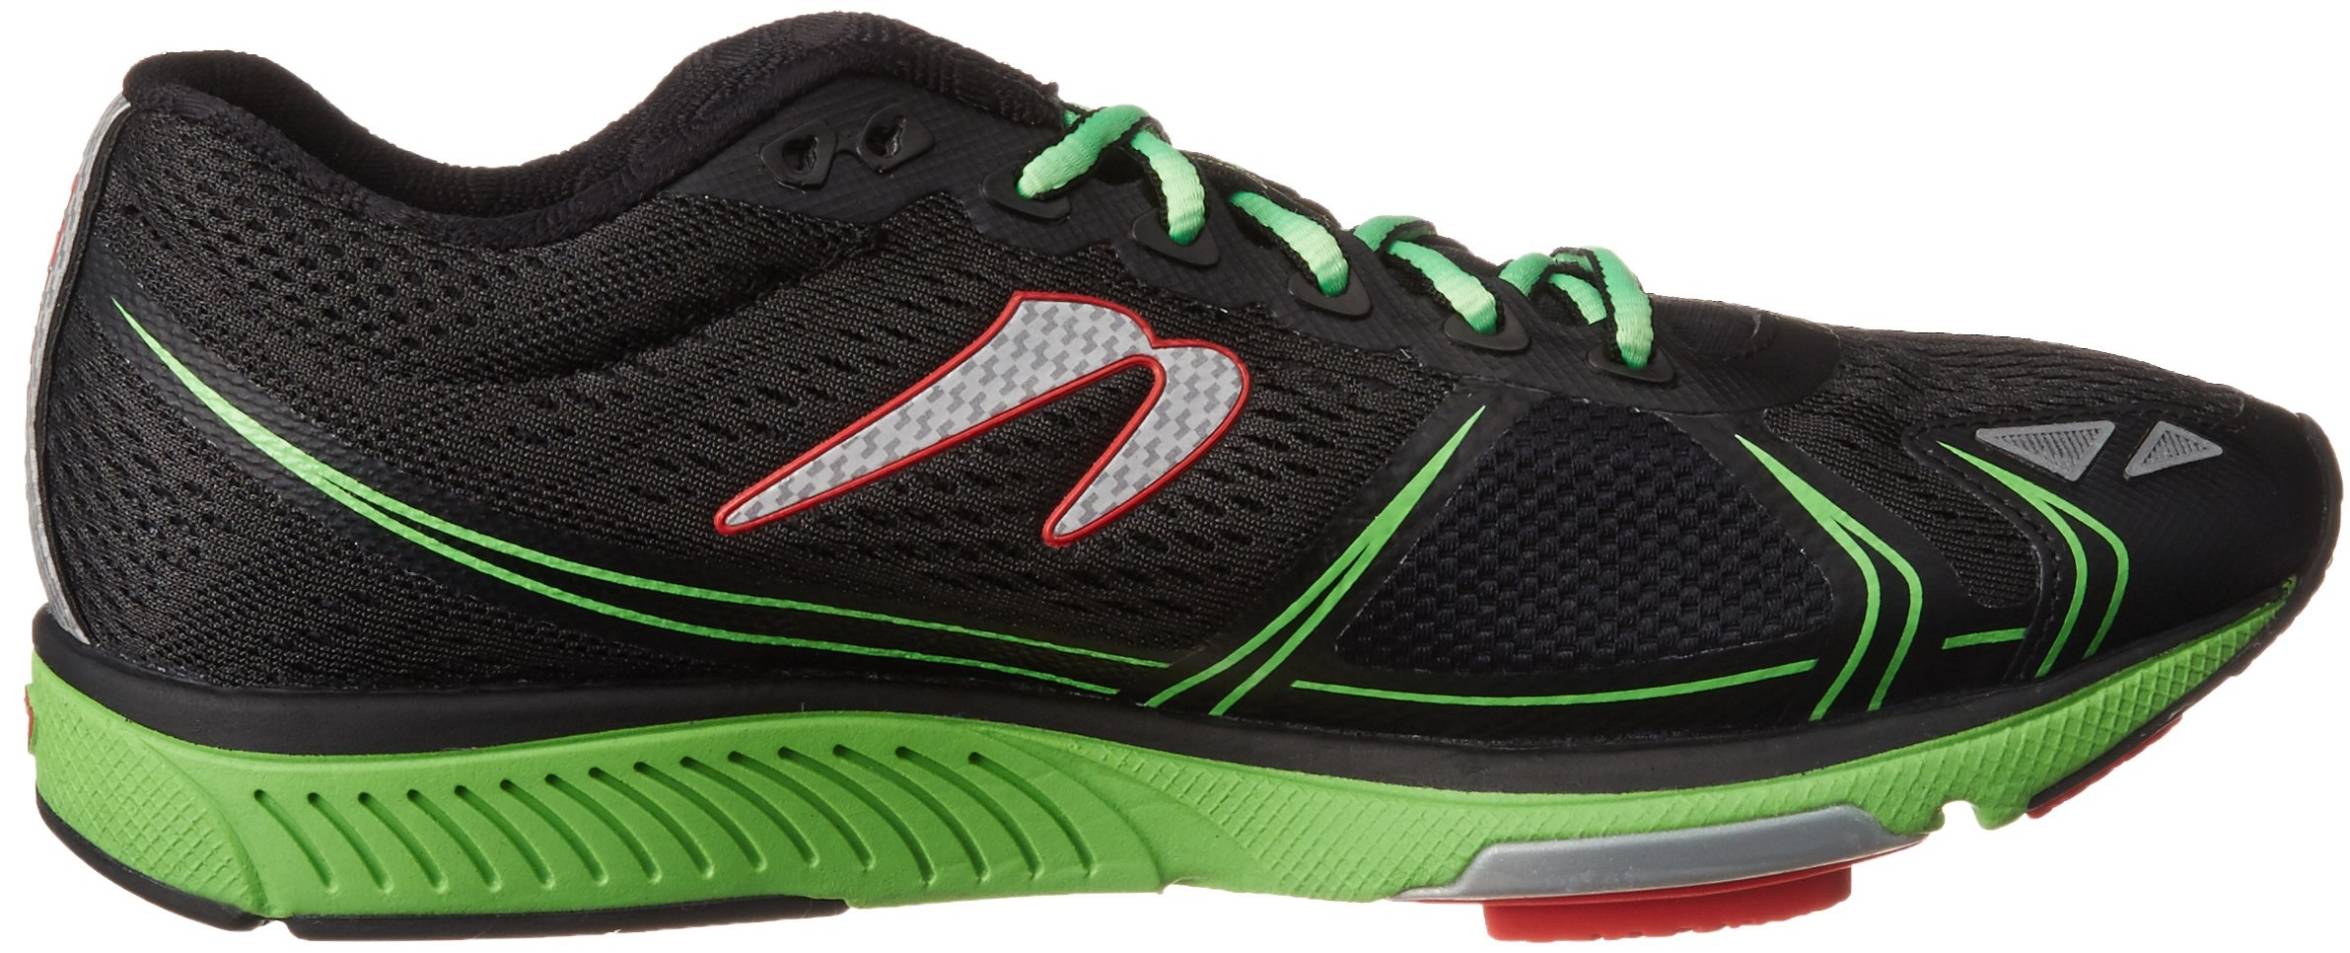 Save 54% on Newton Running Shoes (37 